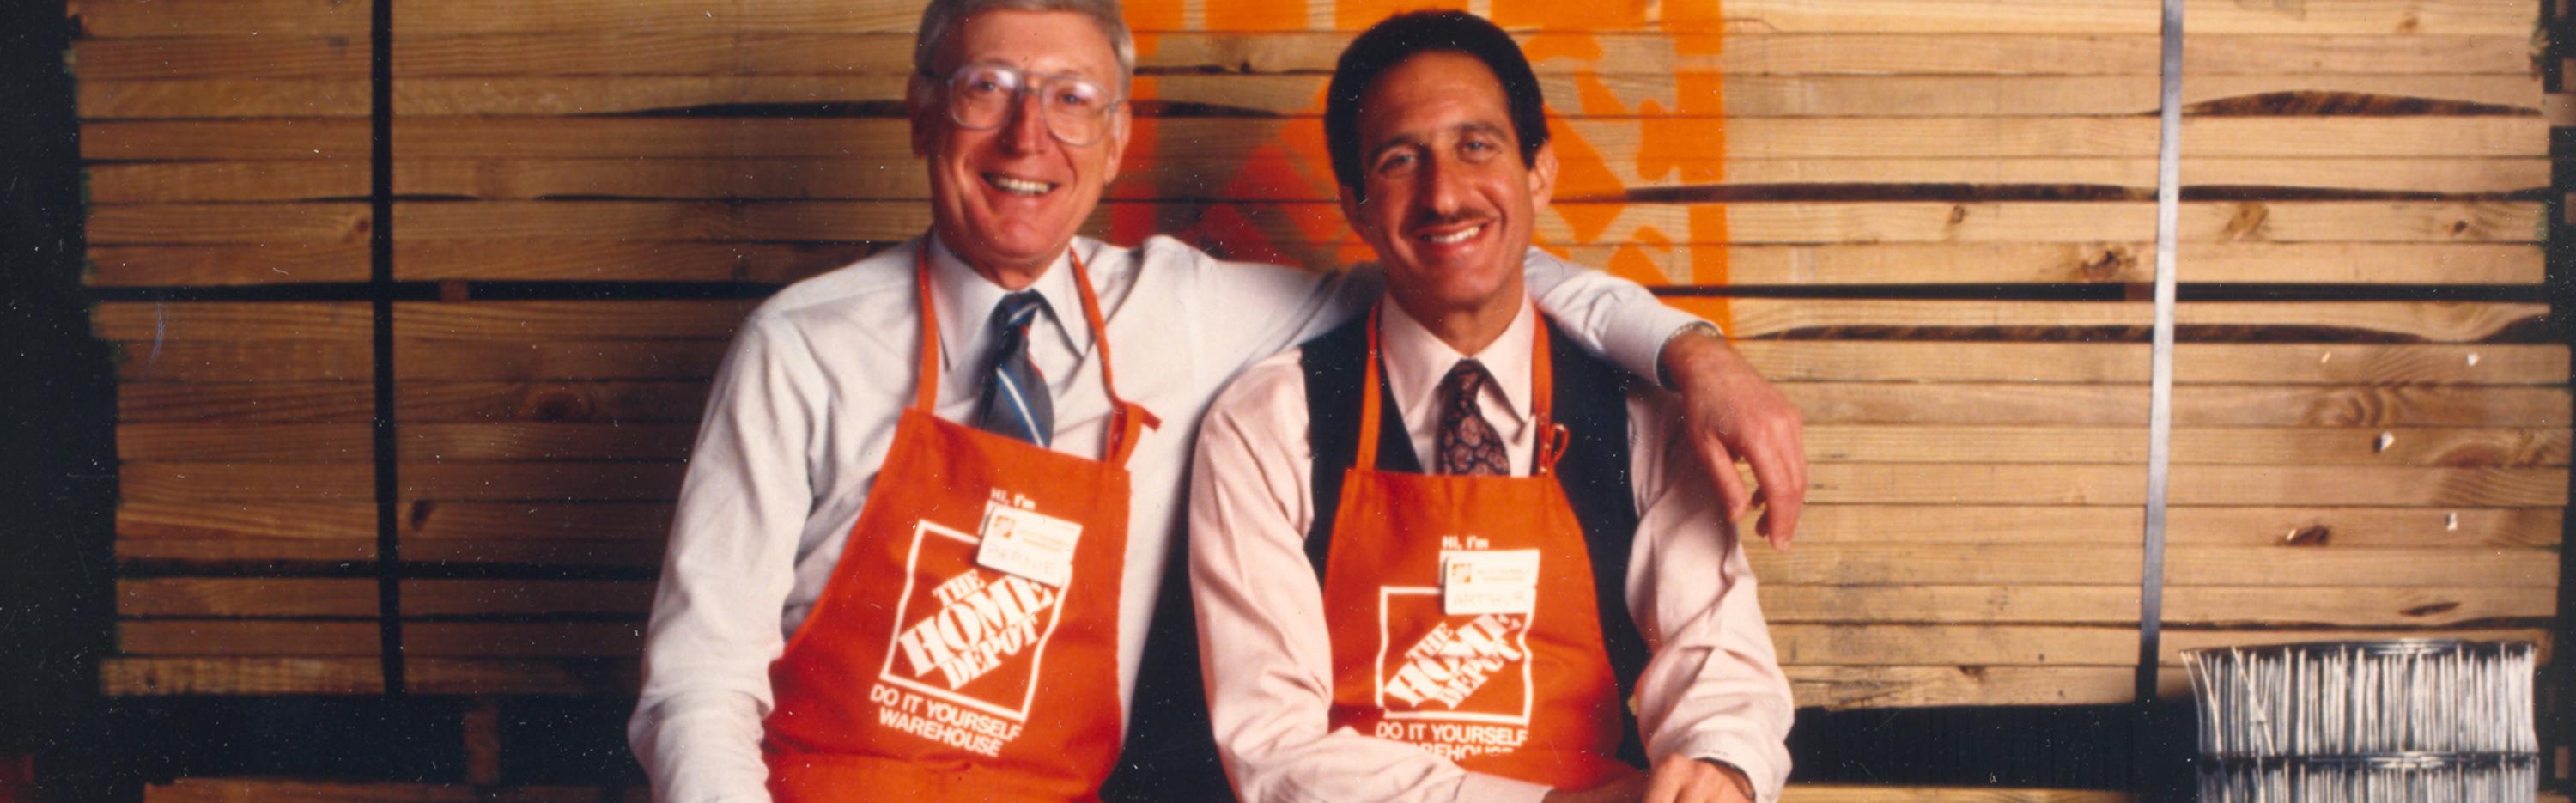 THROWBACK THURSDAY: THE BEGINNING OF THE HOME DEPOT